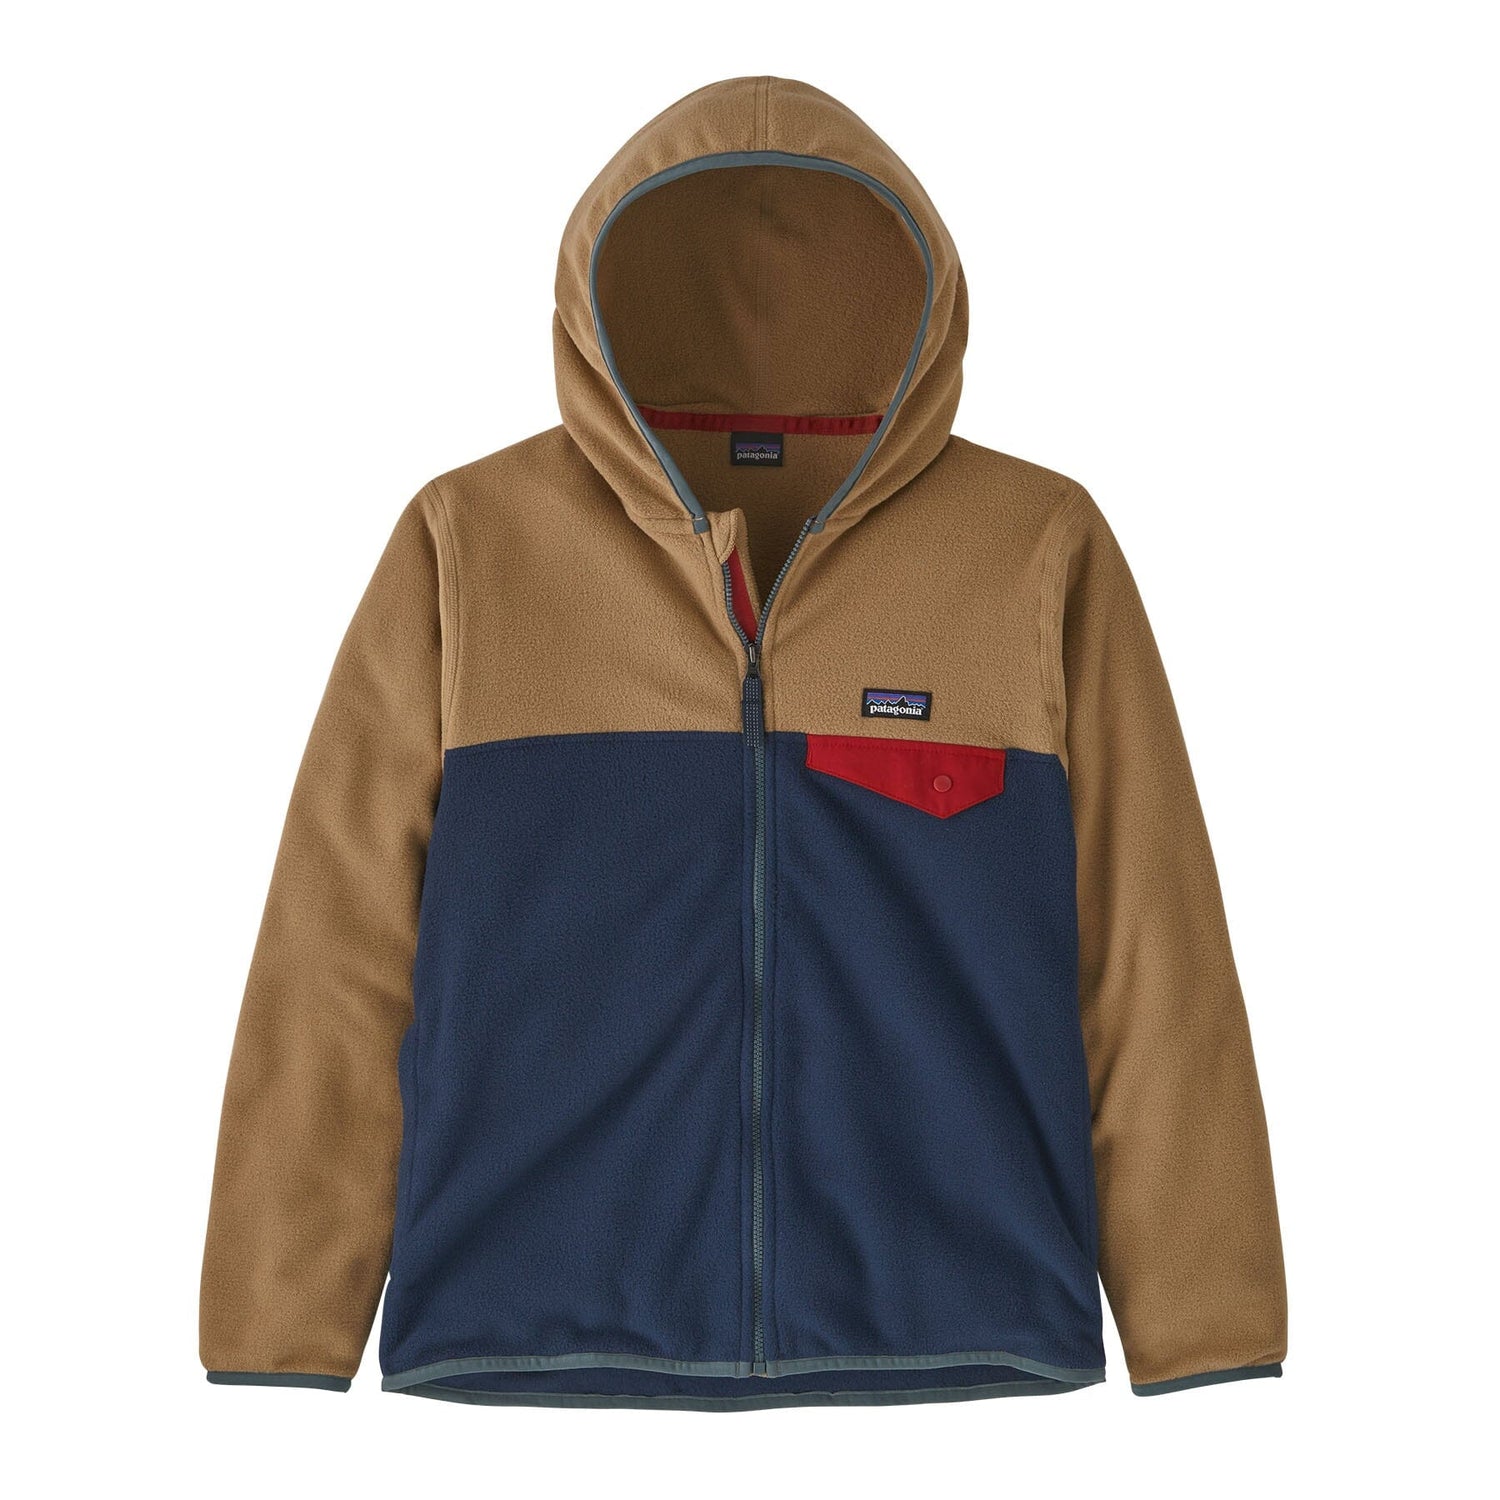 Patagonia Kids Micro D Snap-T Jacket - 100% recycled polyester New Navy w Grayling Brown Jacket